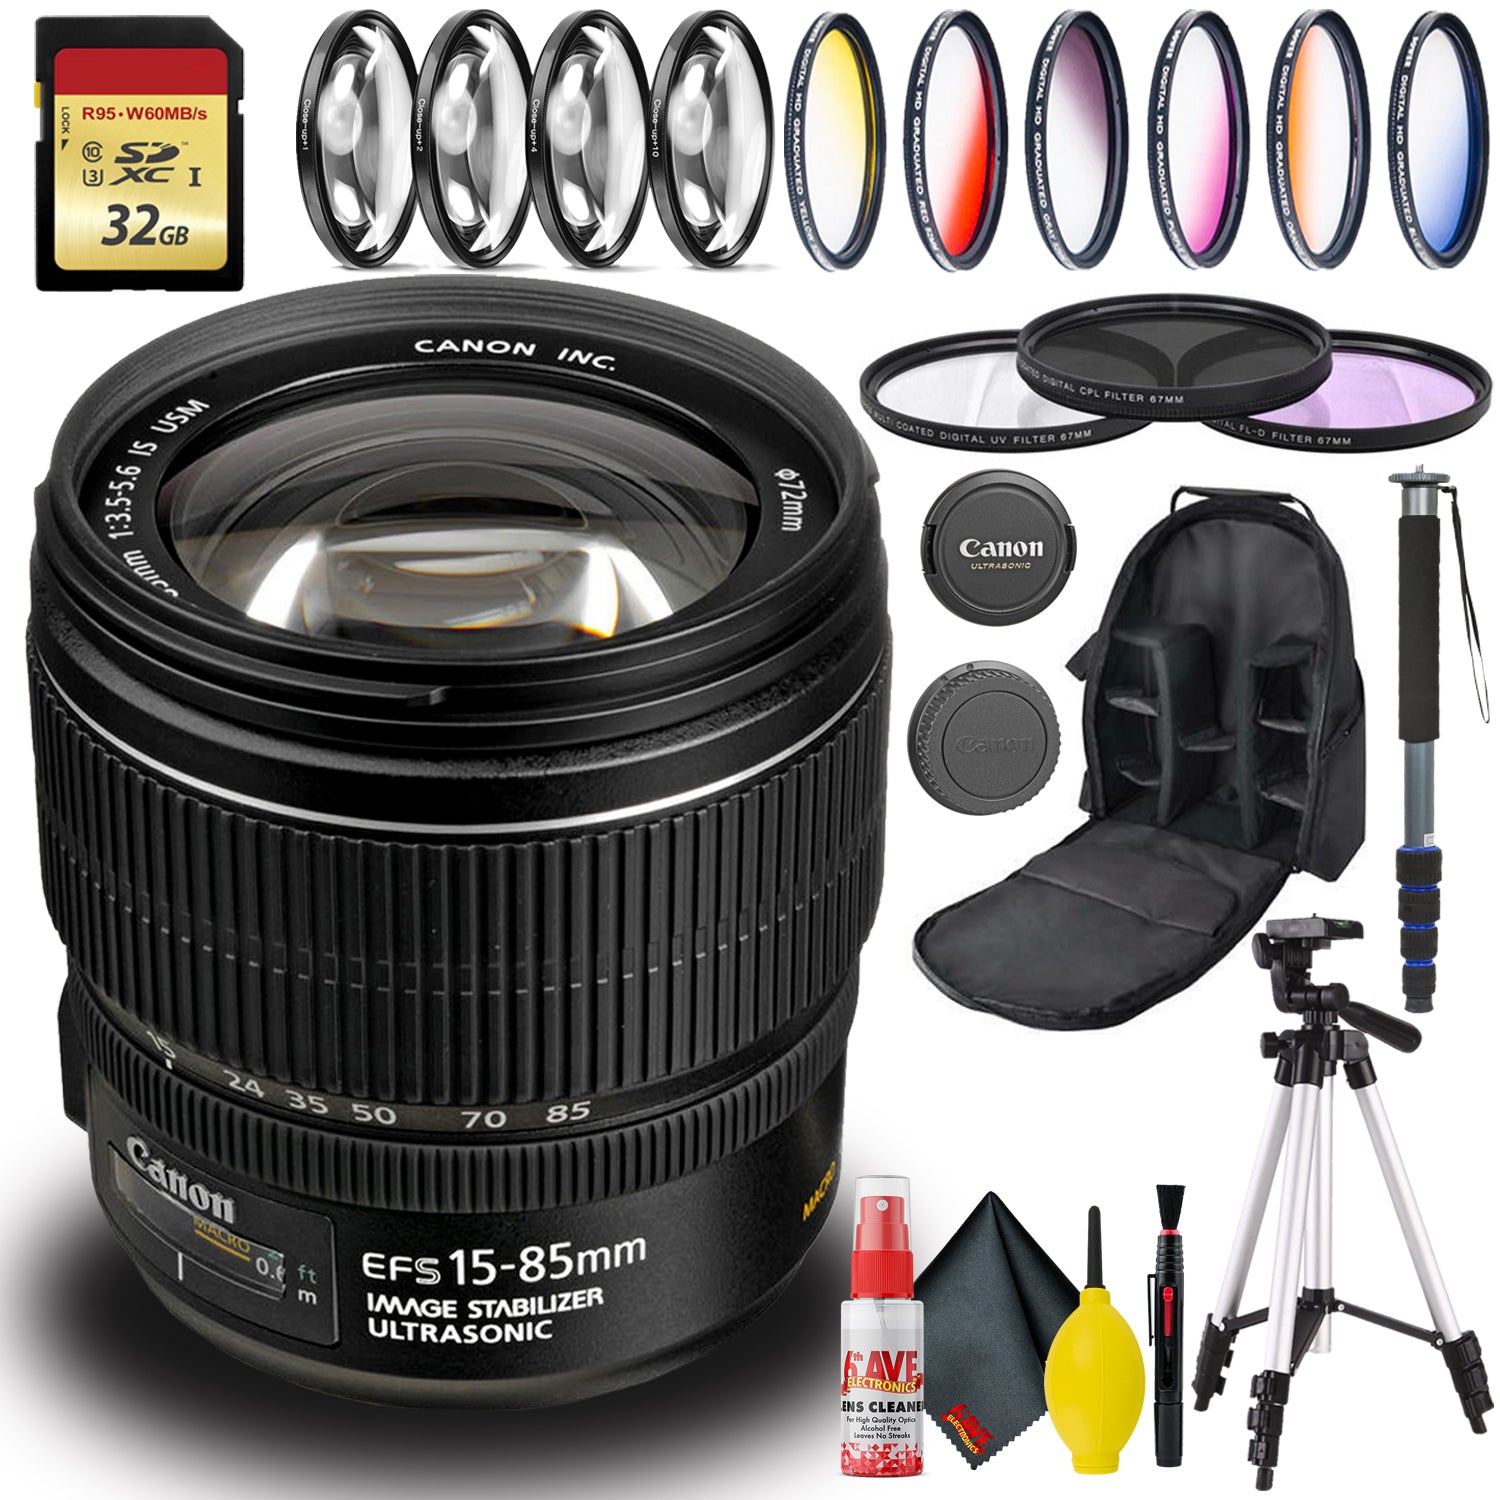 Canon EF-S 15-85mm USM Lens (Intl Model) Includes Filters, Backpack, and More